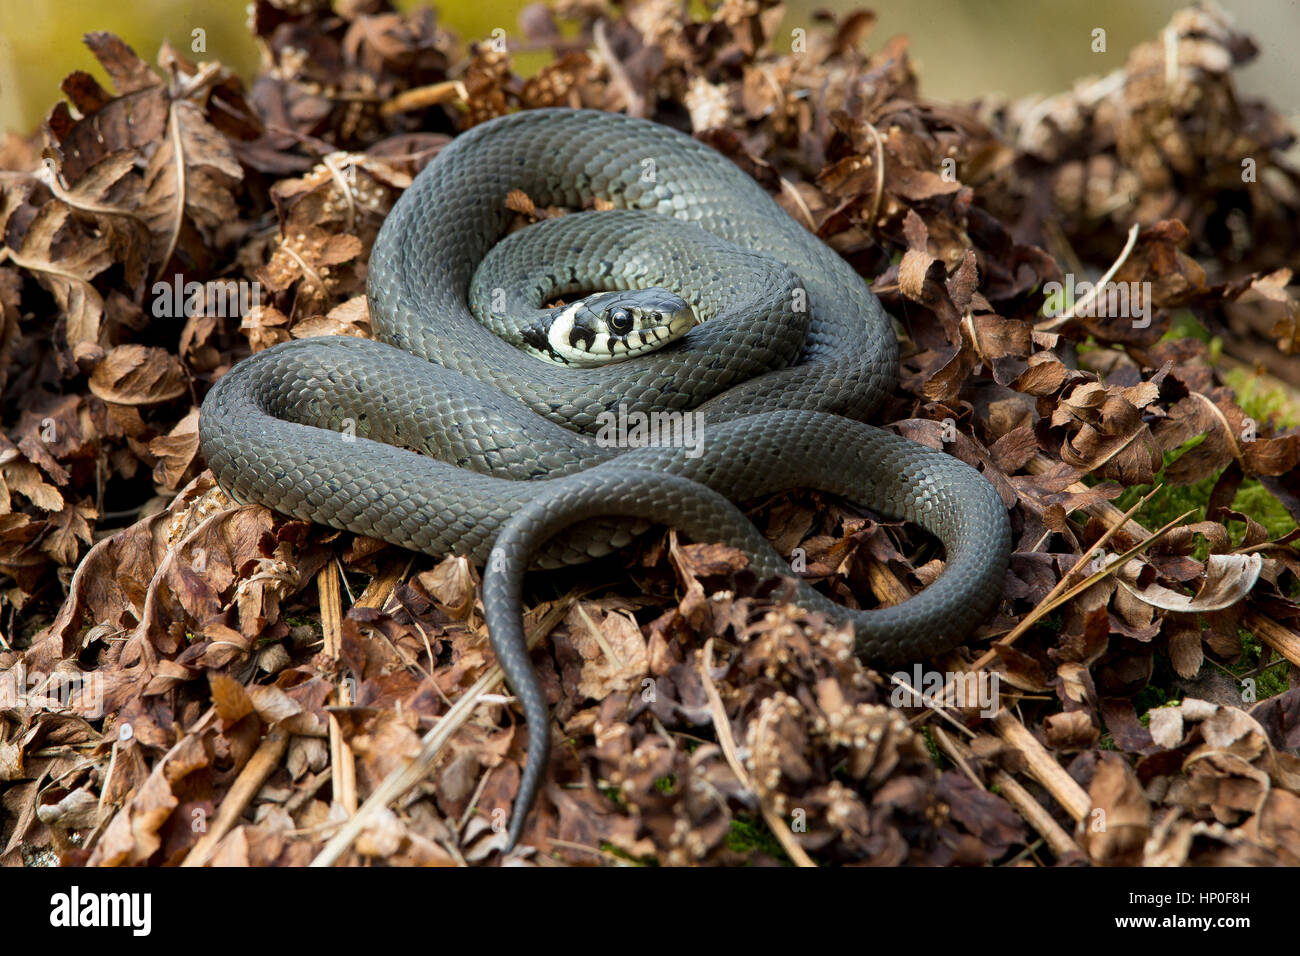 Grass snake (Natrix natrix) coiled on a bed of brown dead bracken Stock Photo